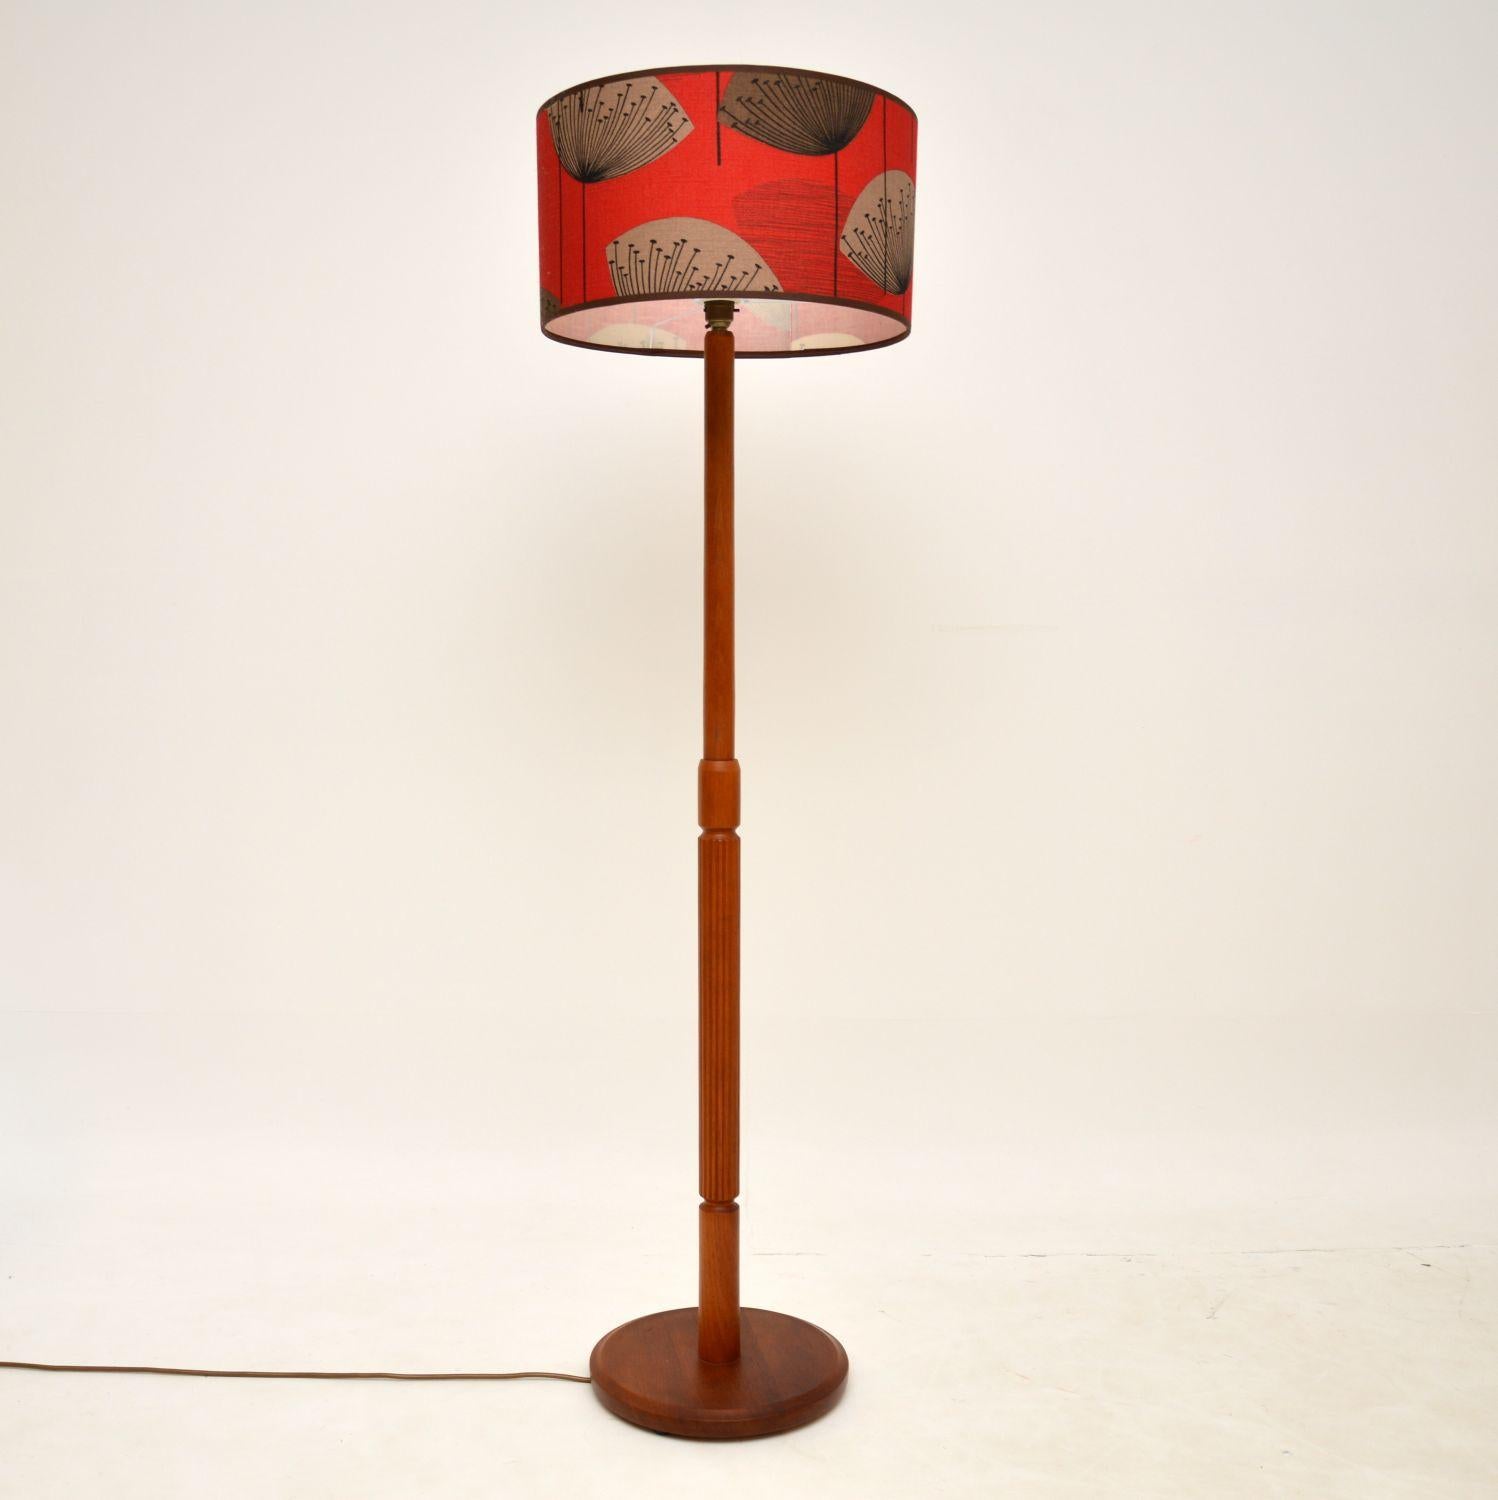 A stylish and very well made vintage lamp in solid teak. This was made in Denmark and dates from around the 1960’s.

It is of lovely quality, with a lovely grooved design at the lower half of the base. It is slightly lower than most standard floor